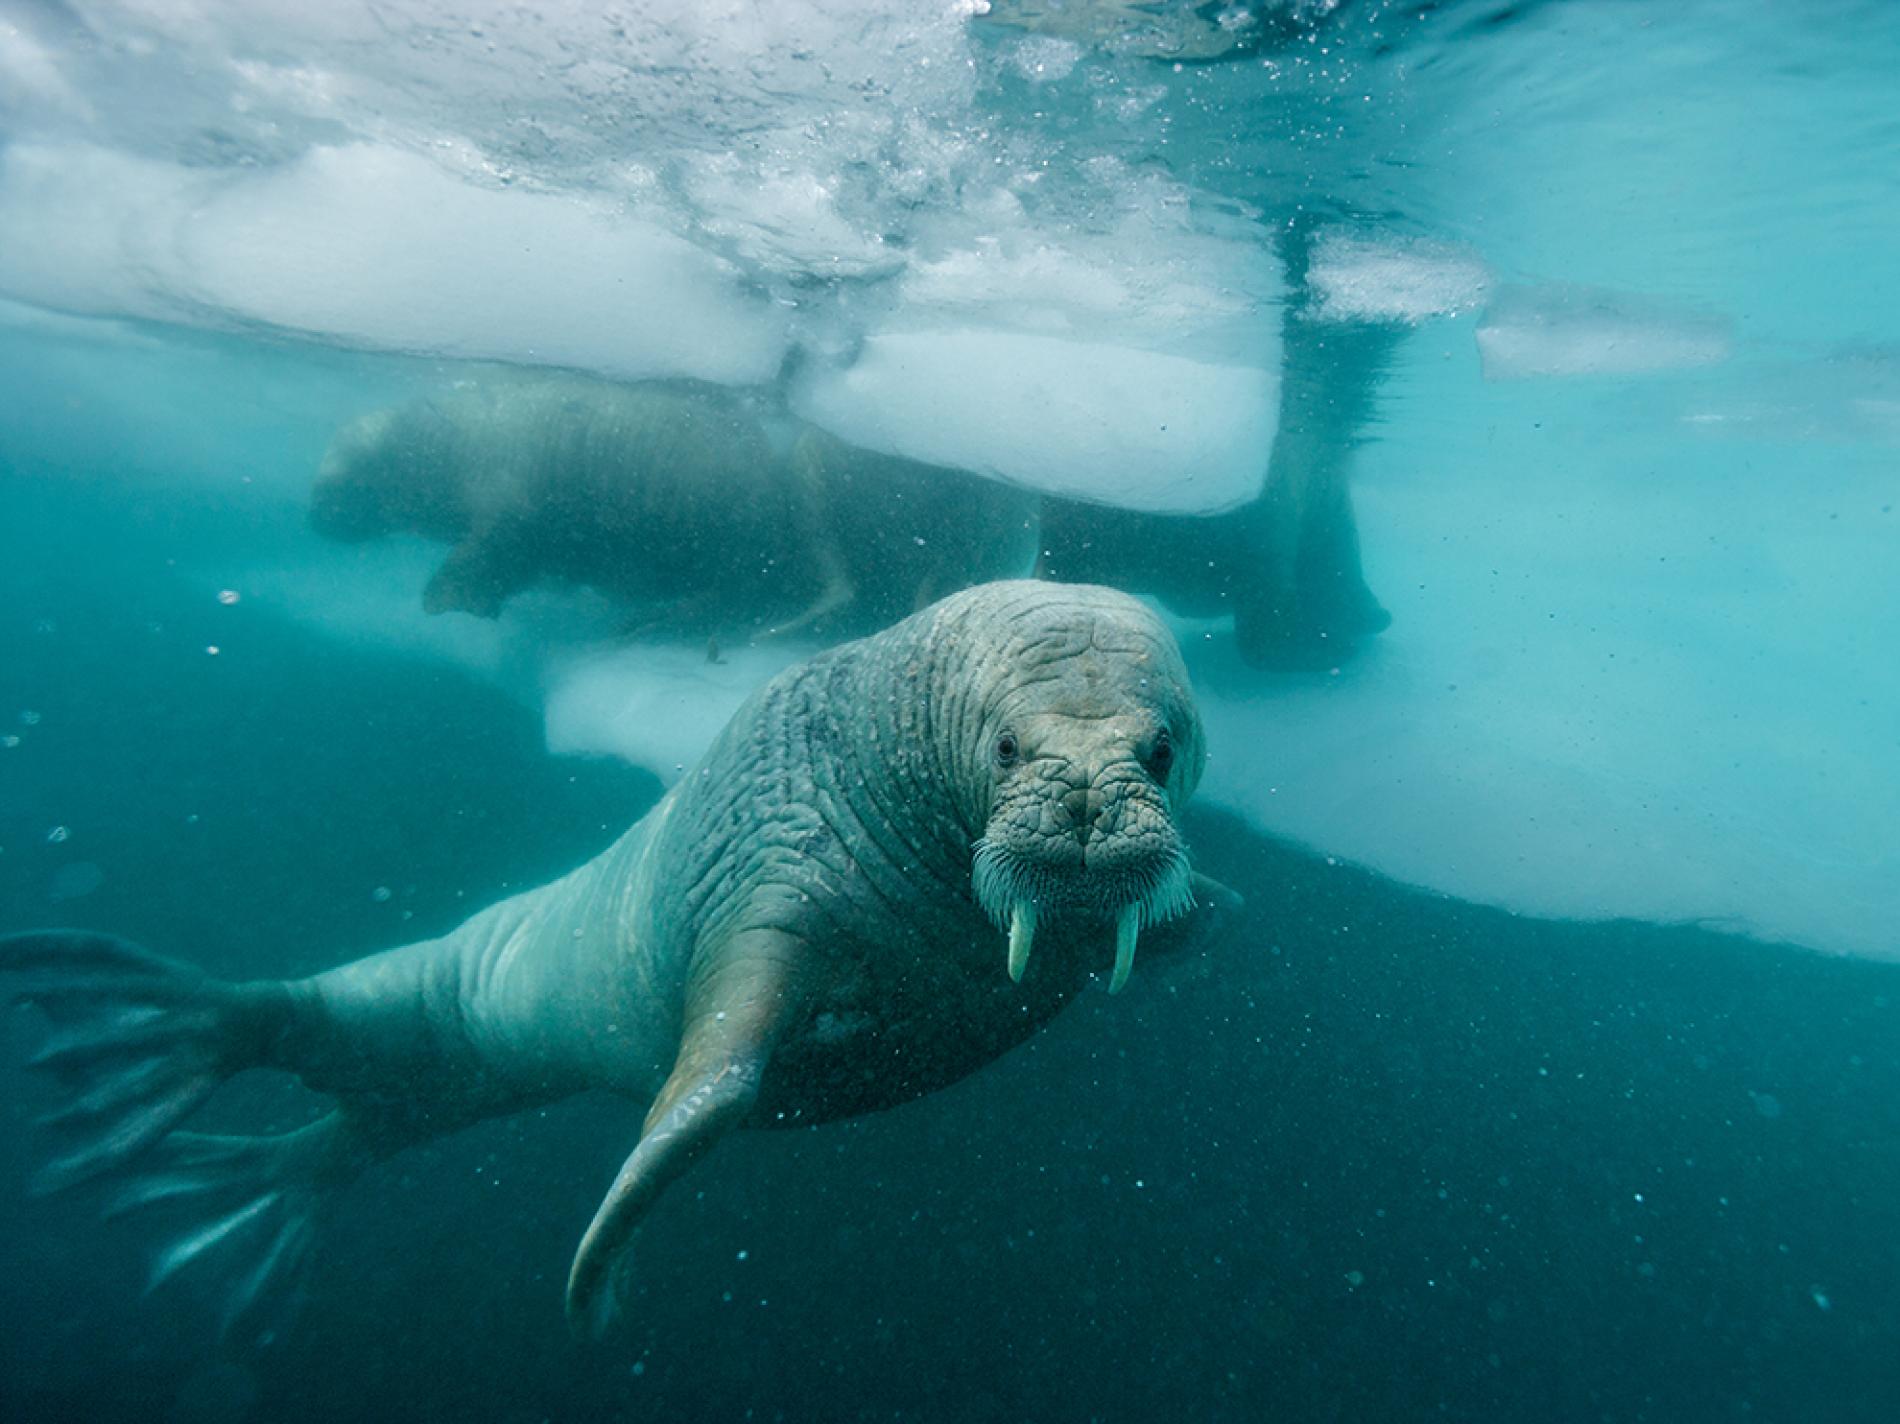 Walrus under water off the coast of Greenland